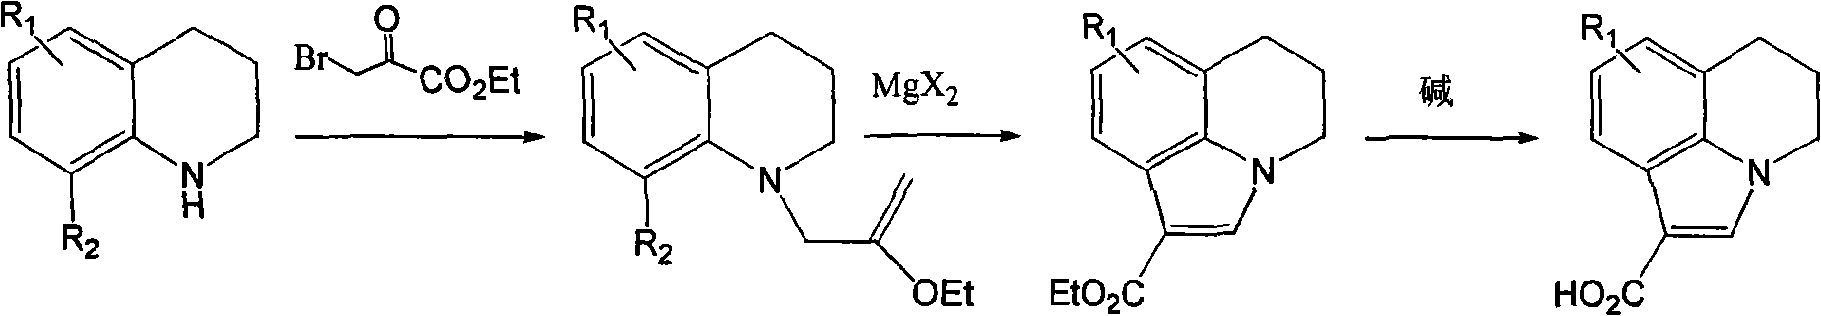 Preparation of condensed ring indole compounds